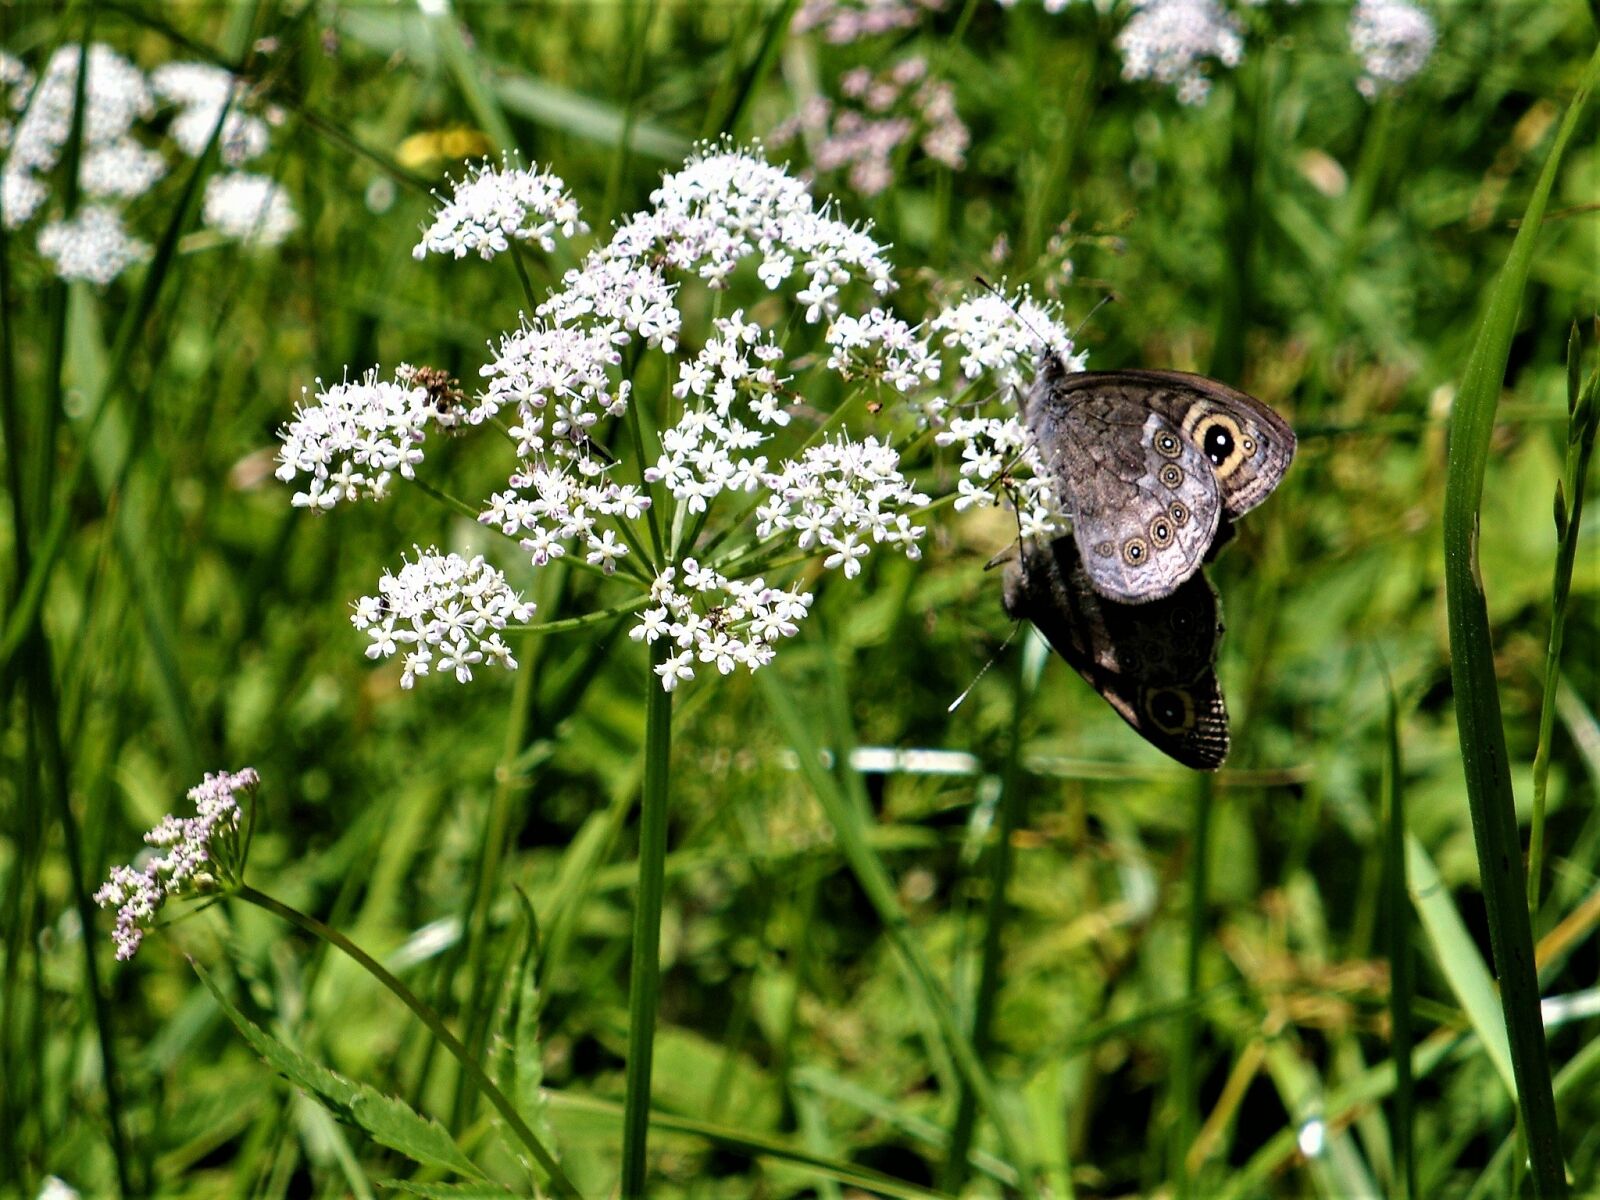 Sony Cyber-shot DSC-W170 sample photo. Butterfly, meadow, nature photography